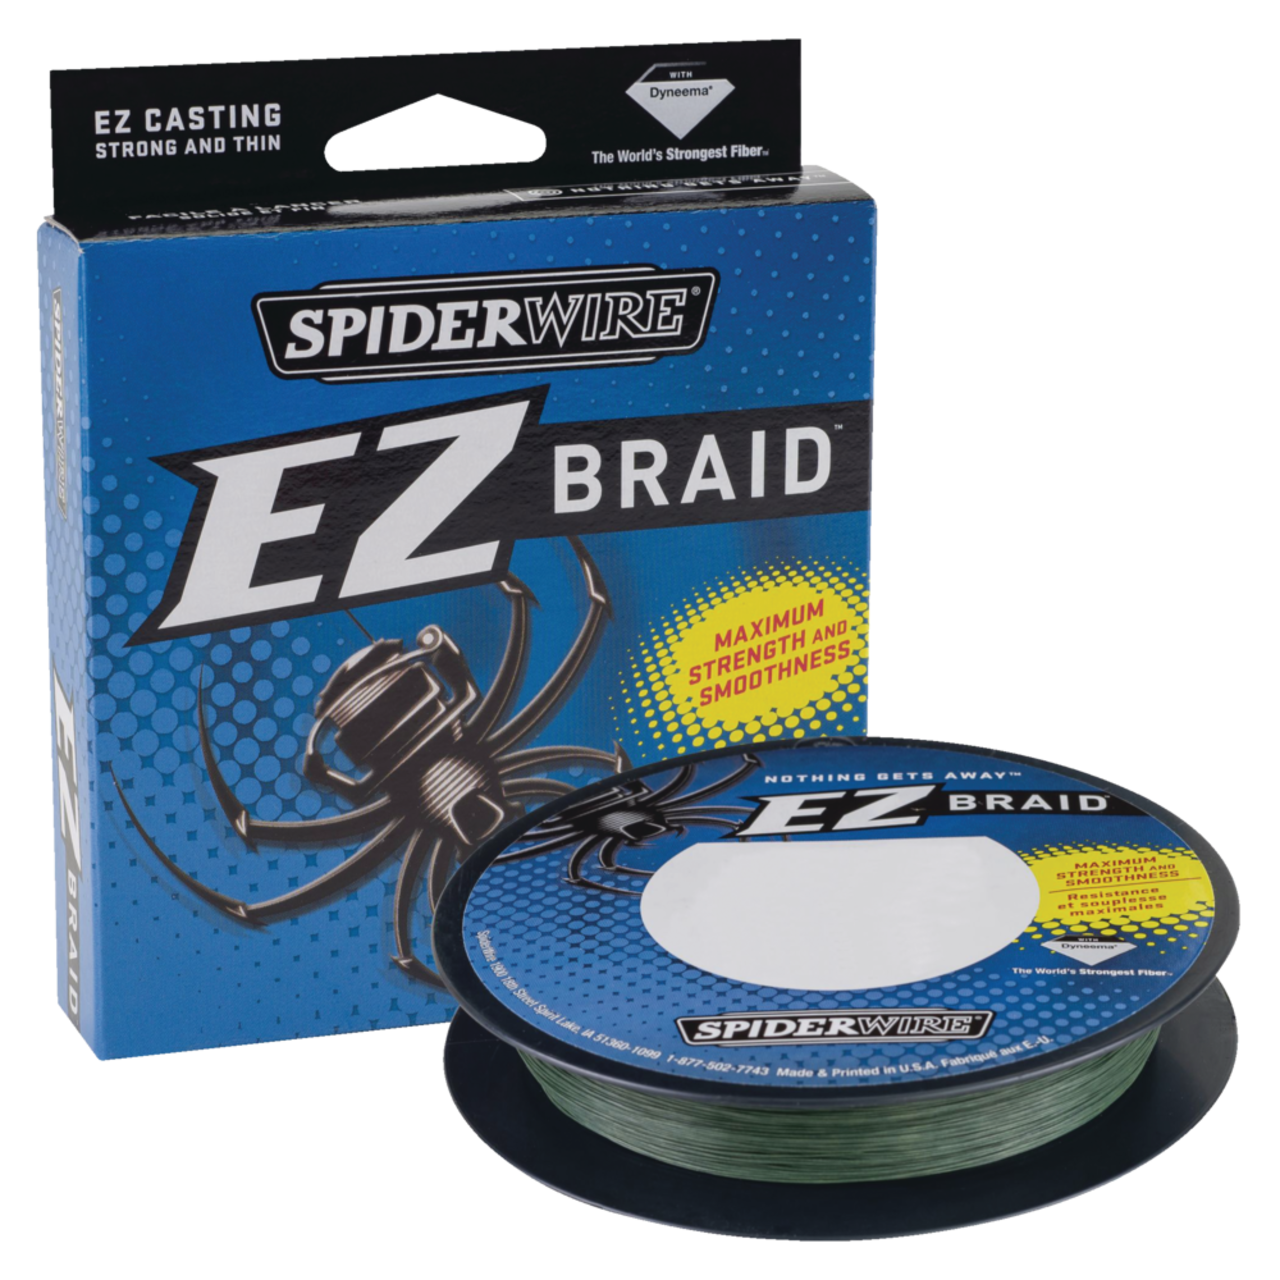 https://media-www.canadiantire.ca/product/playing/fishing/fishing-accessories/0782988/spiderwire-ez-braid-moss-green-20lb-110-yards-9623edfa-a9de-41d0-b218-32e18cda7387.png?imdensity=1&imwidth=1244&impolicy=mZoom